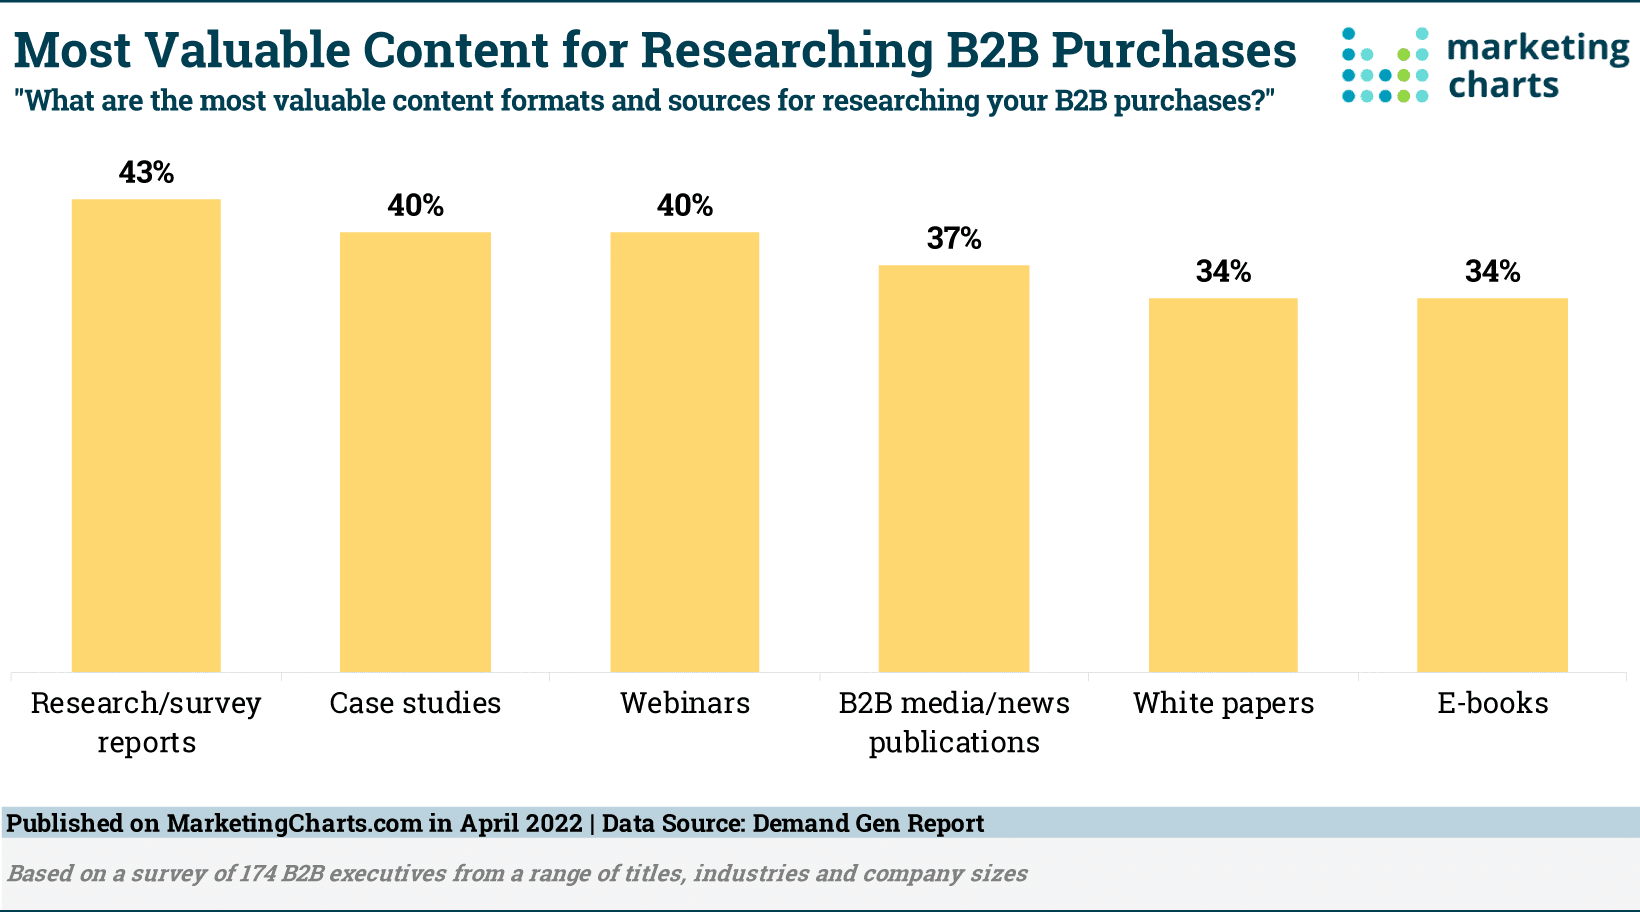 A case study blog post template is a preferred resource for executives making B2B purchases